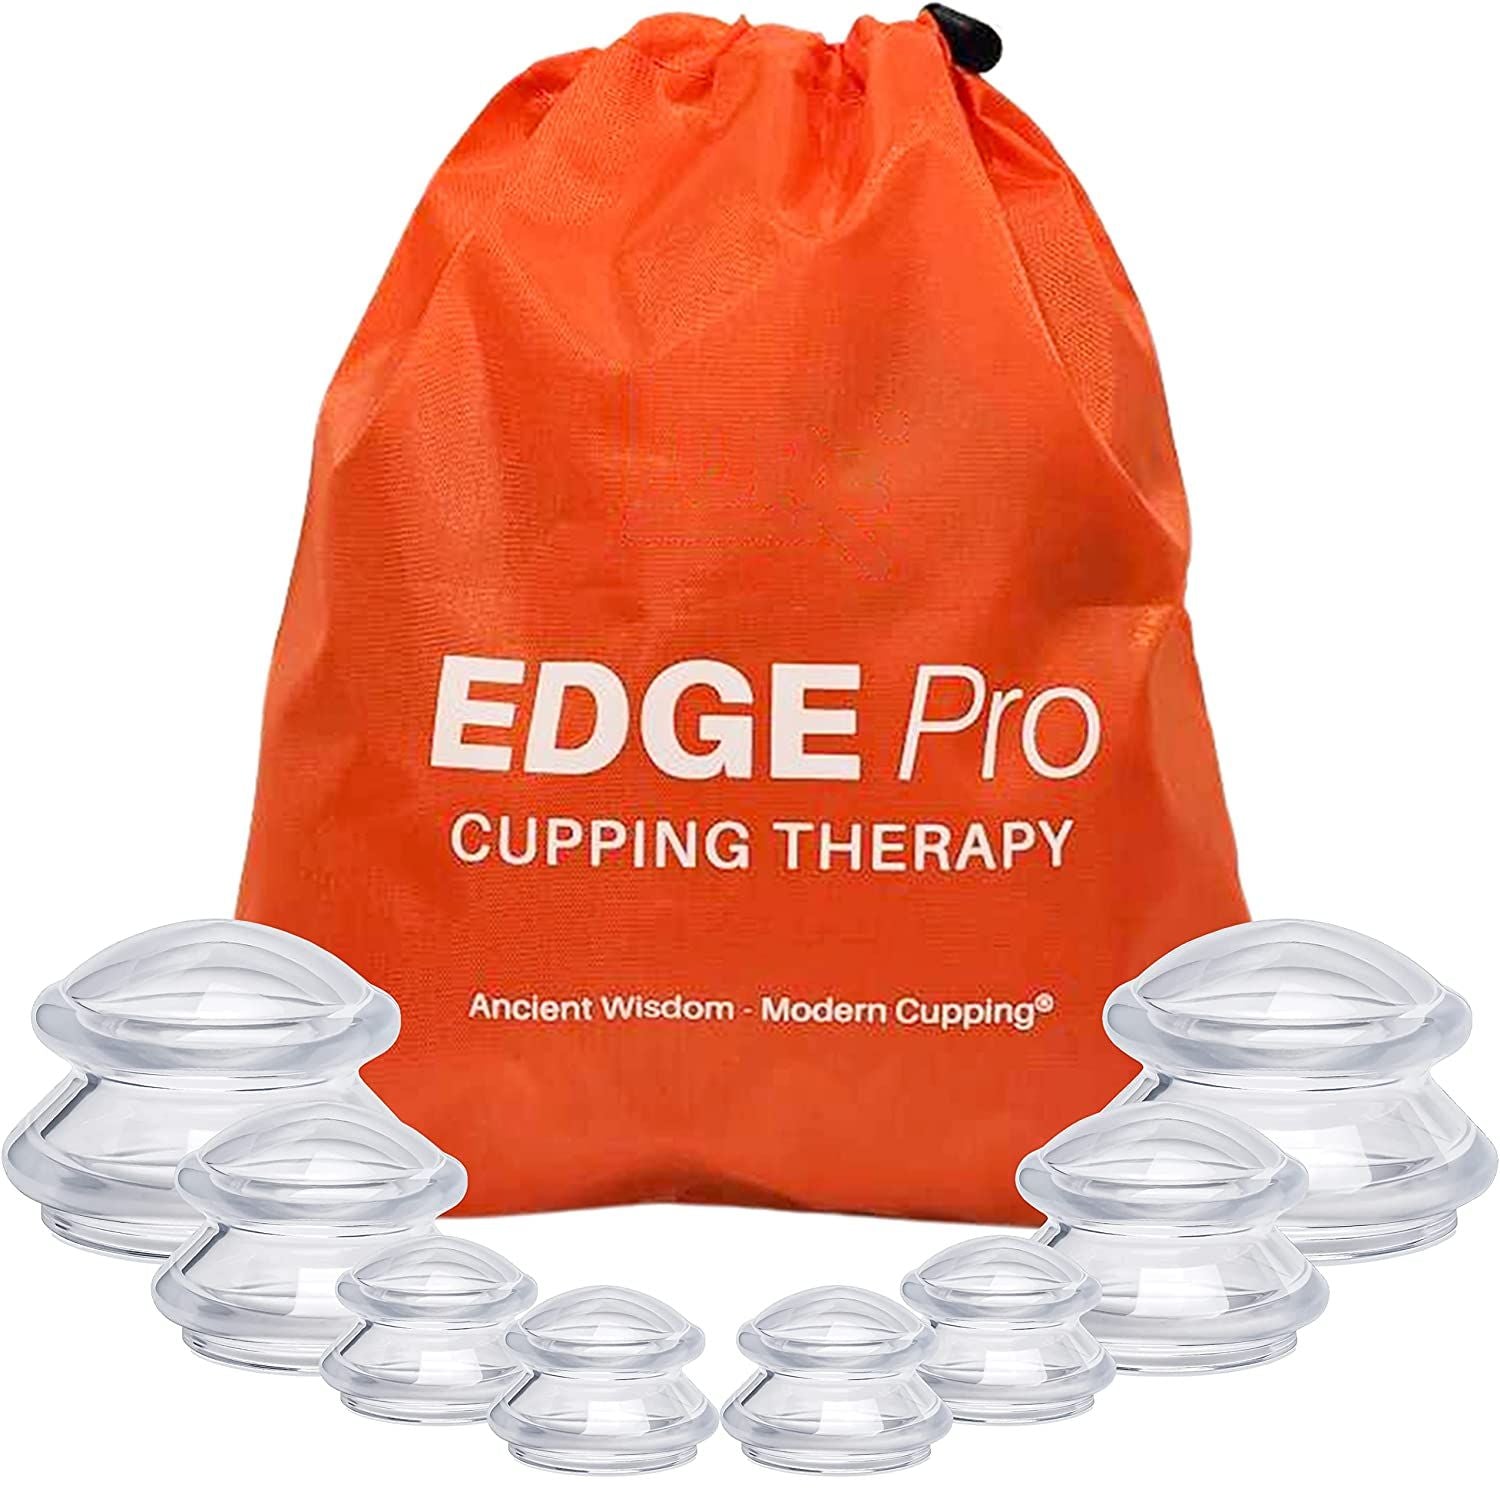 Lure Essentials EDGE™ Cupping Set for Easy At-Home Cupping Therapy